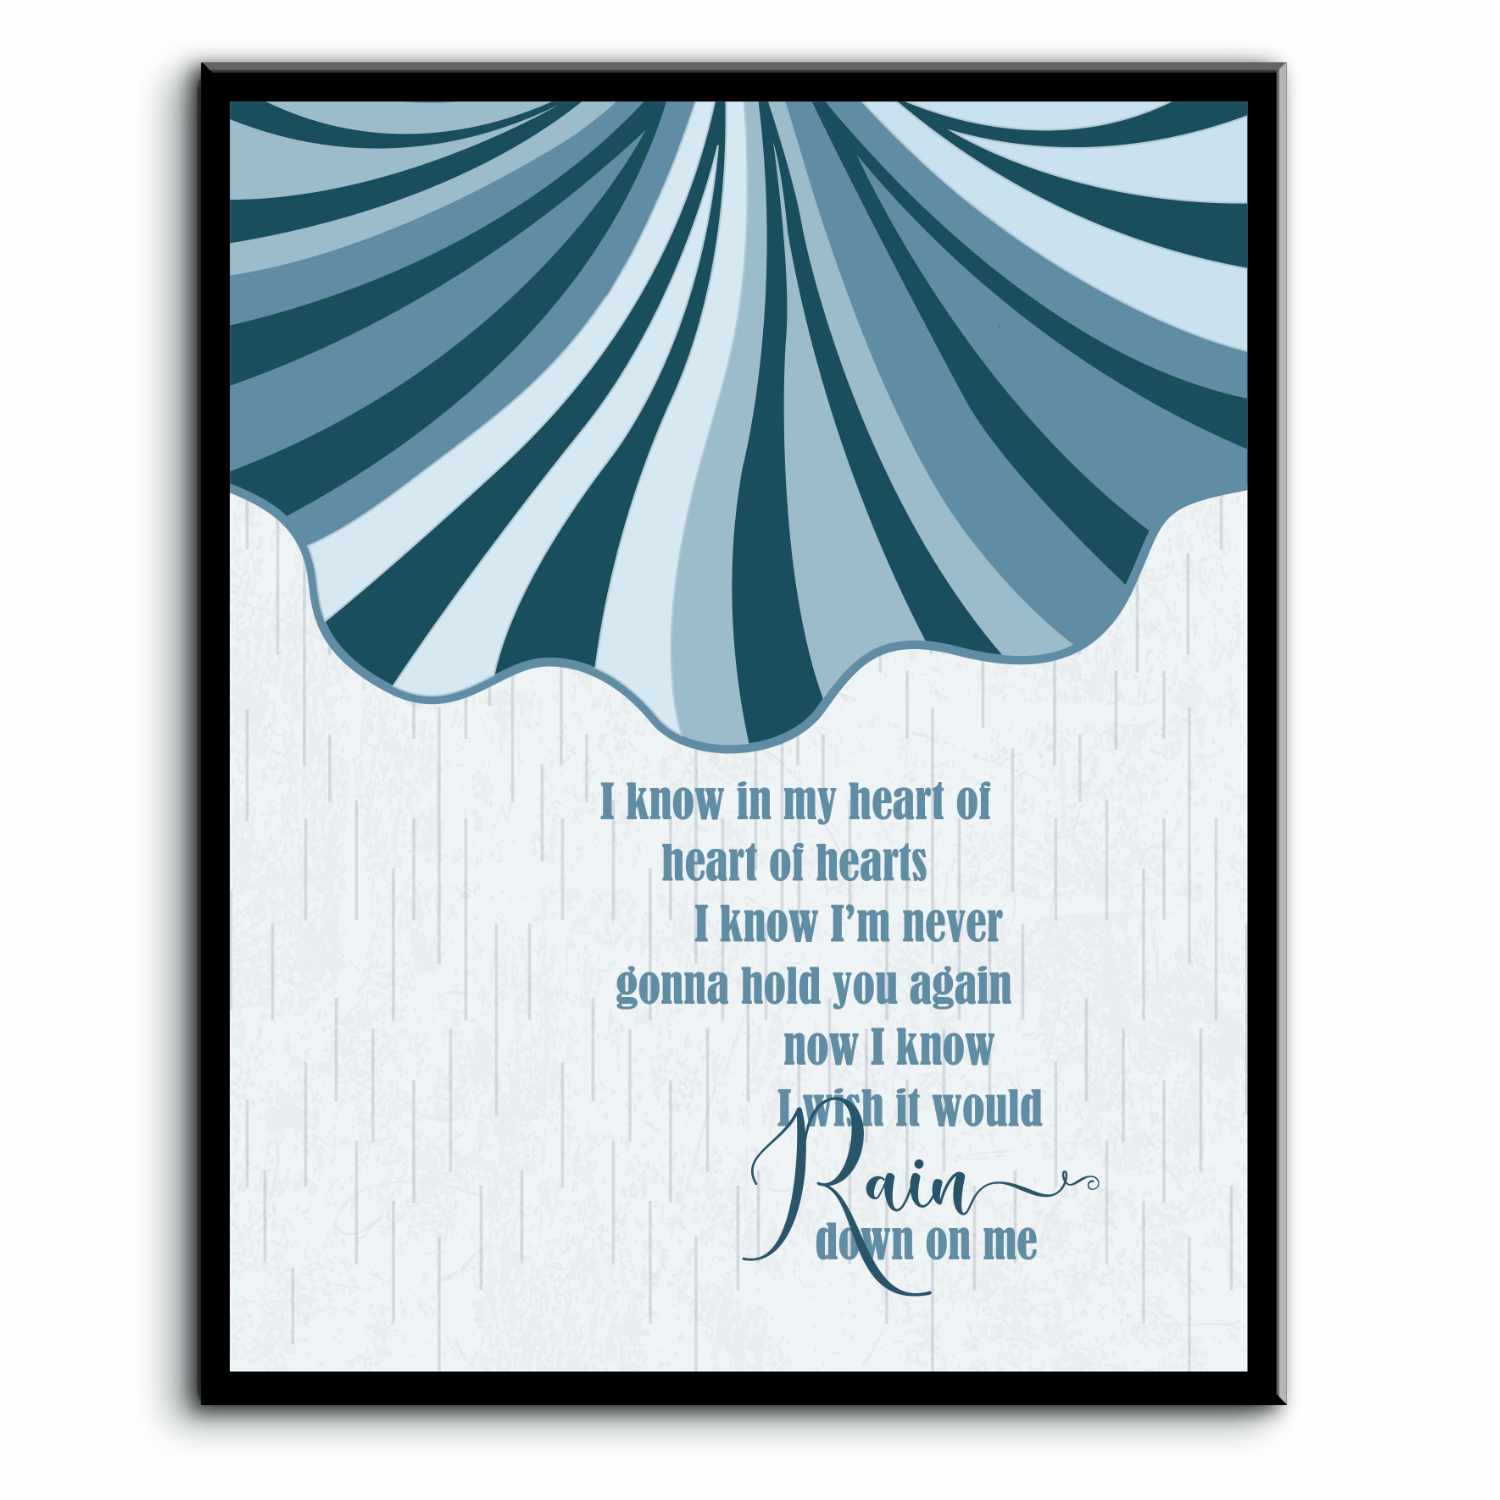 I Wish it Would Rain Down by Phil Collins - Song Lyric Poster Song Lyrics Art Song Lyrics Art 8x10 Plaque Mount 